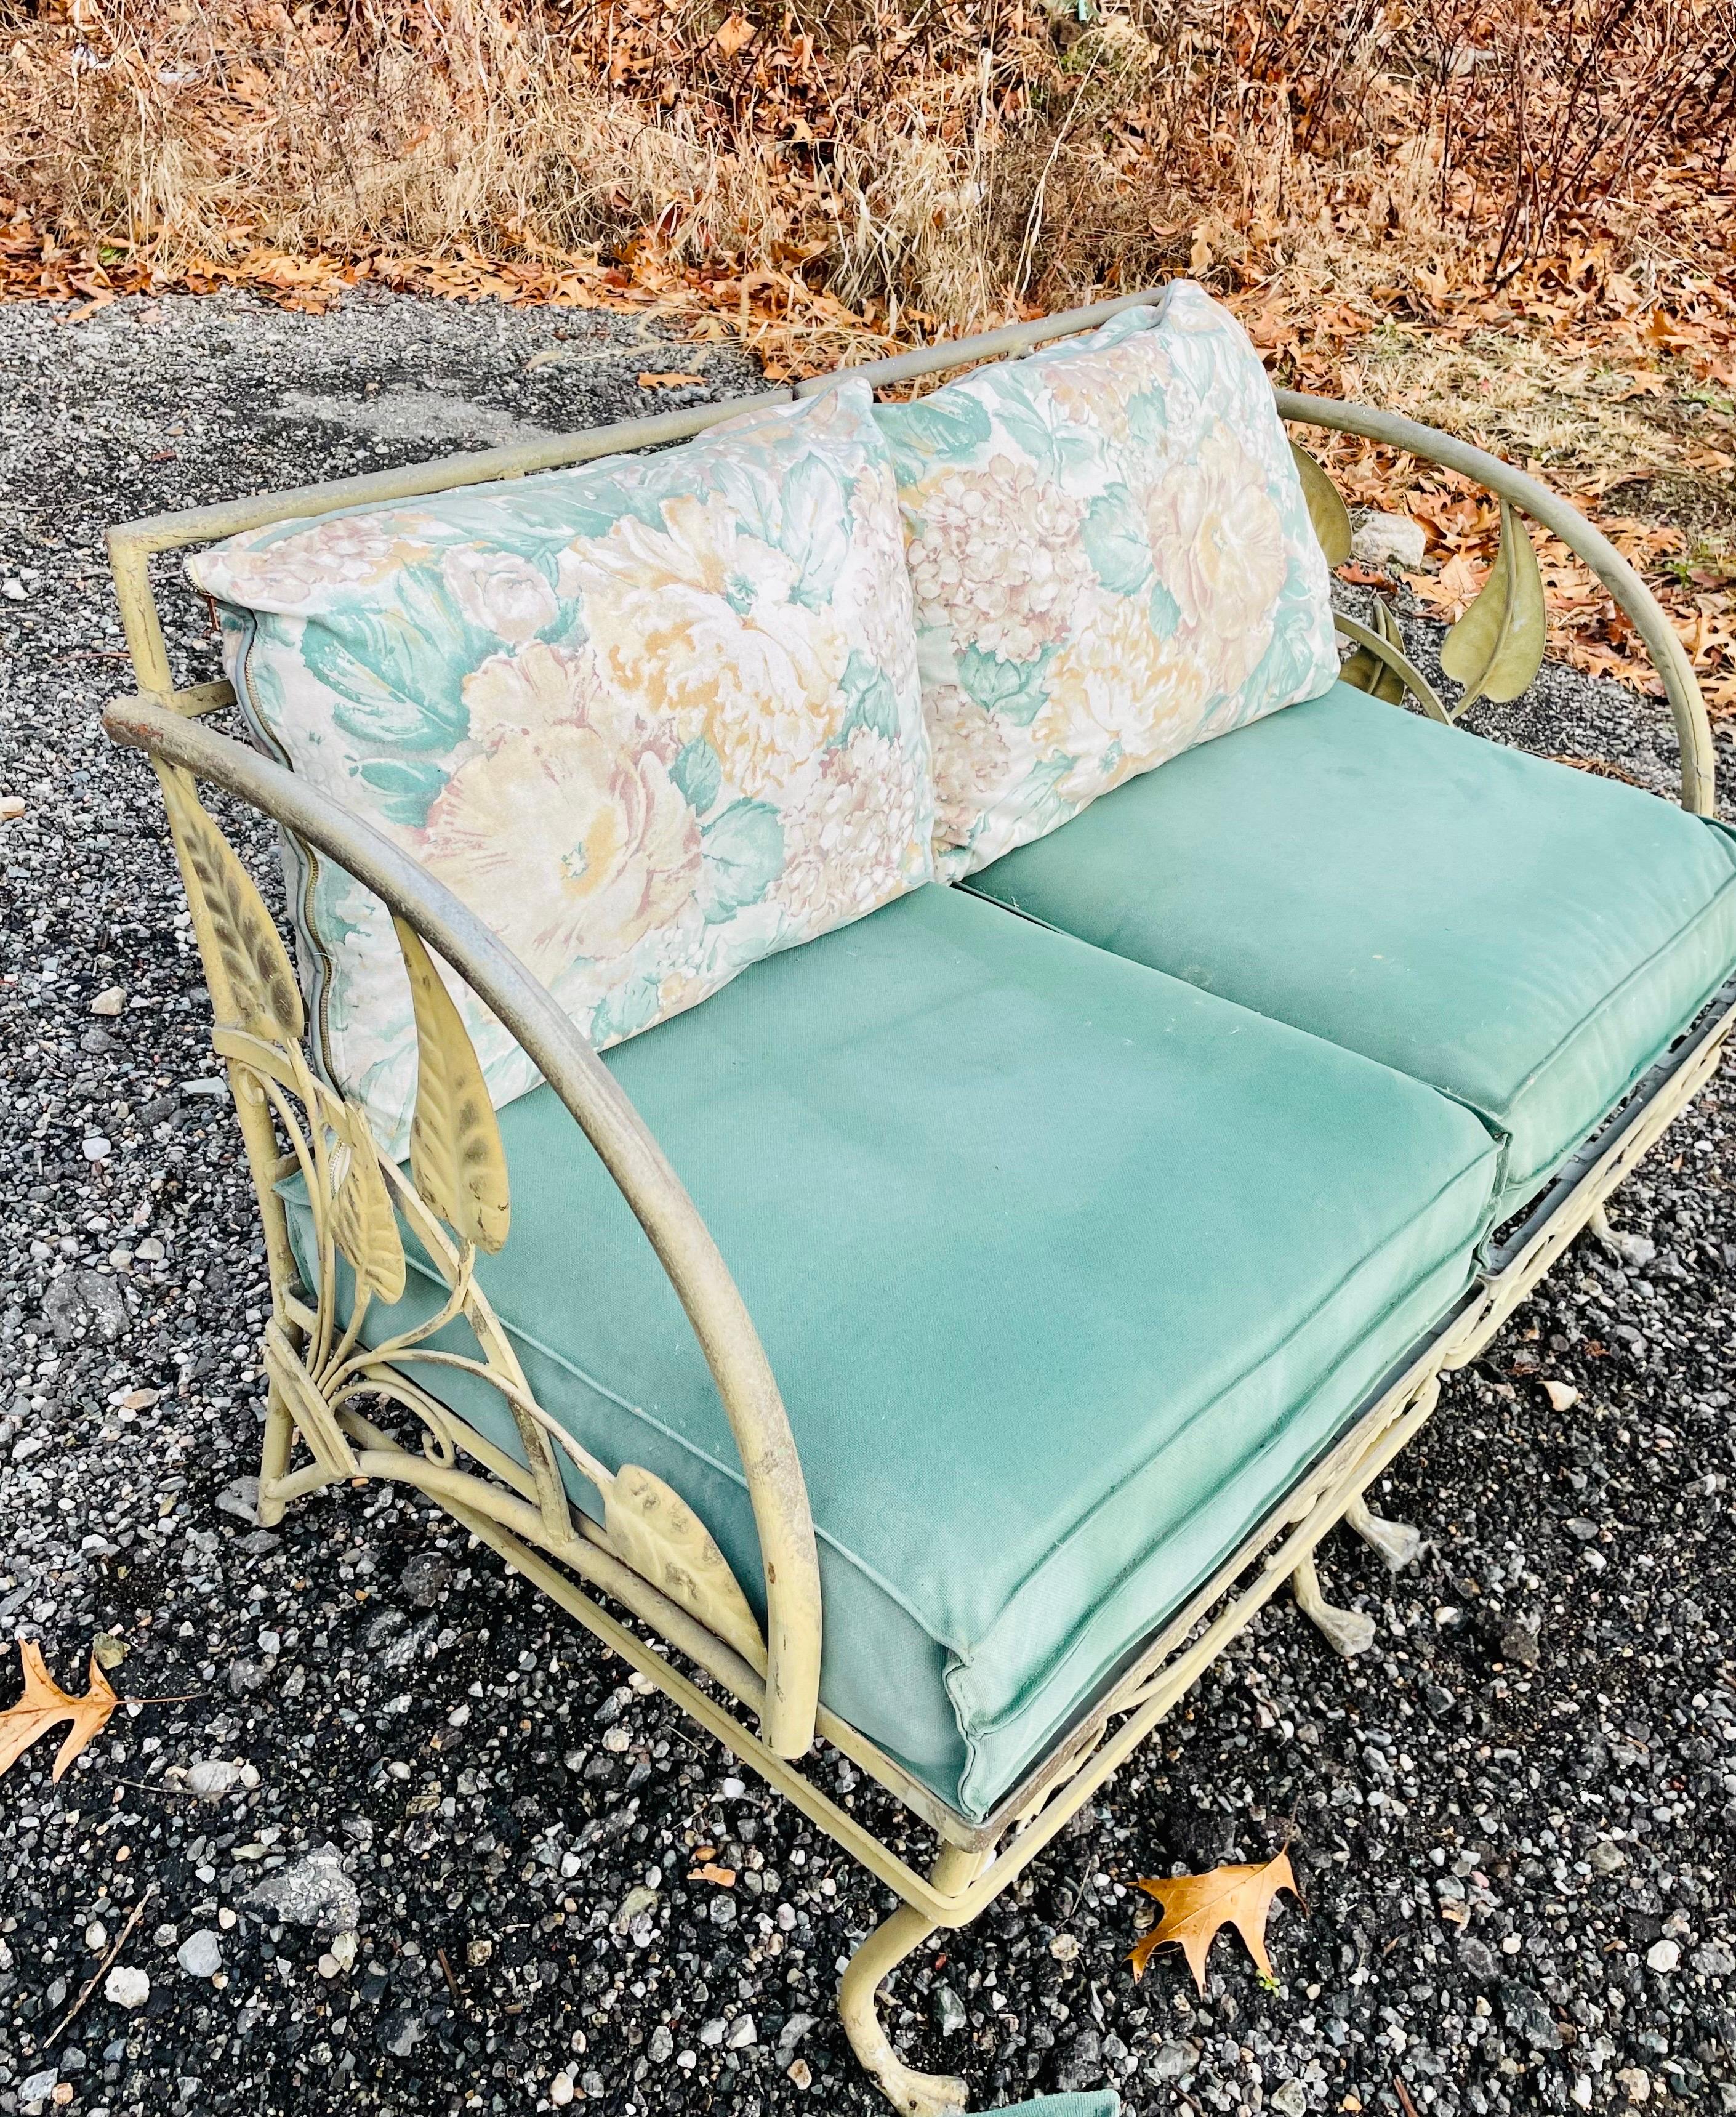 Rare and hard to find Banana Leaf Pattern
Very versatile being 3 separate seats. 
Can set up as a love seat and chair or 3 person sofa
Upholstered cushions and pillows are included. Original Blueish Gray Patina
This set has never been